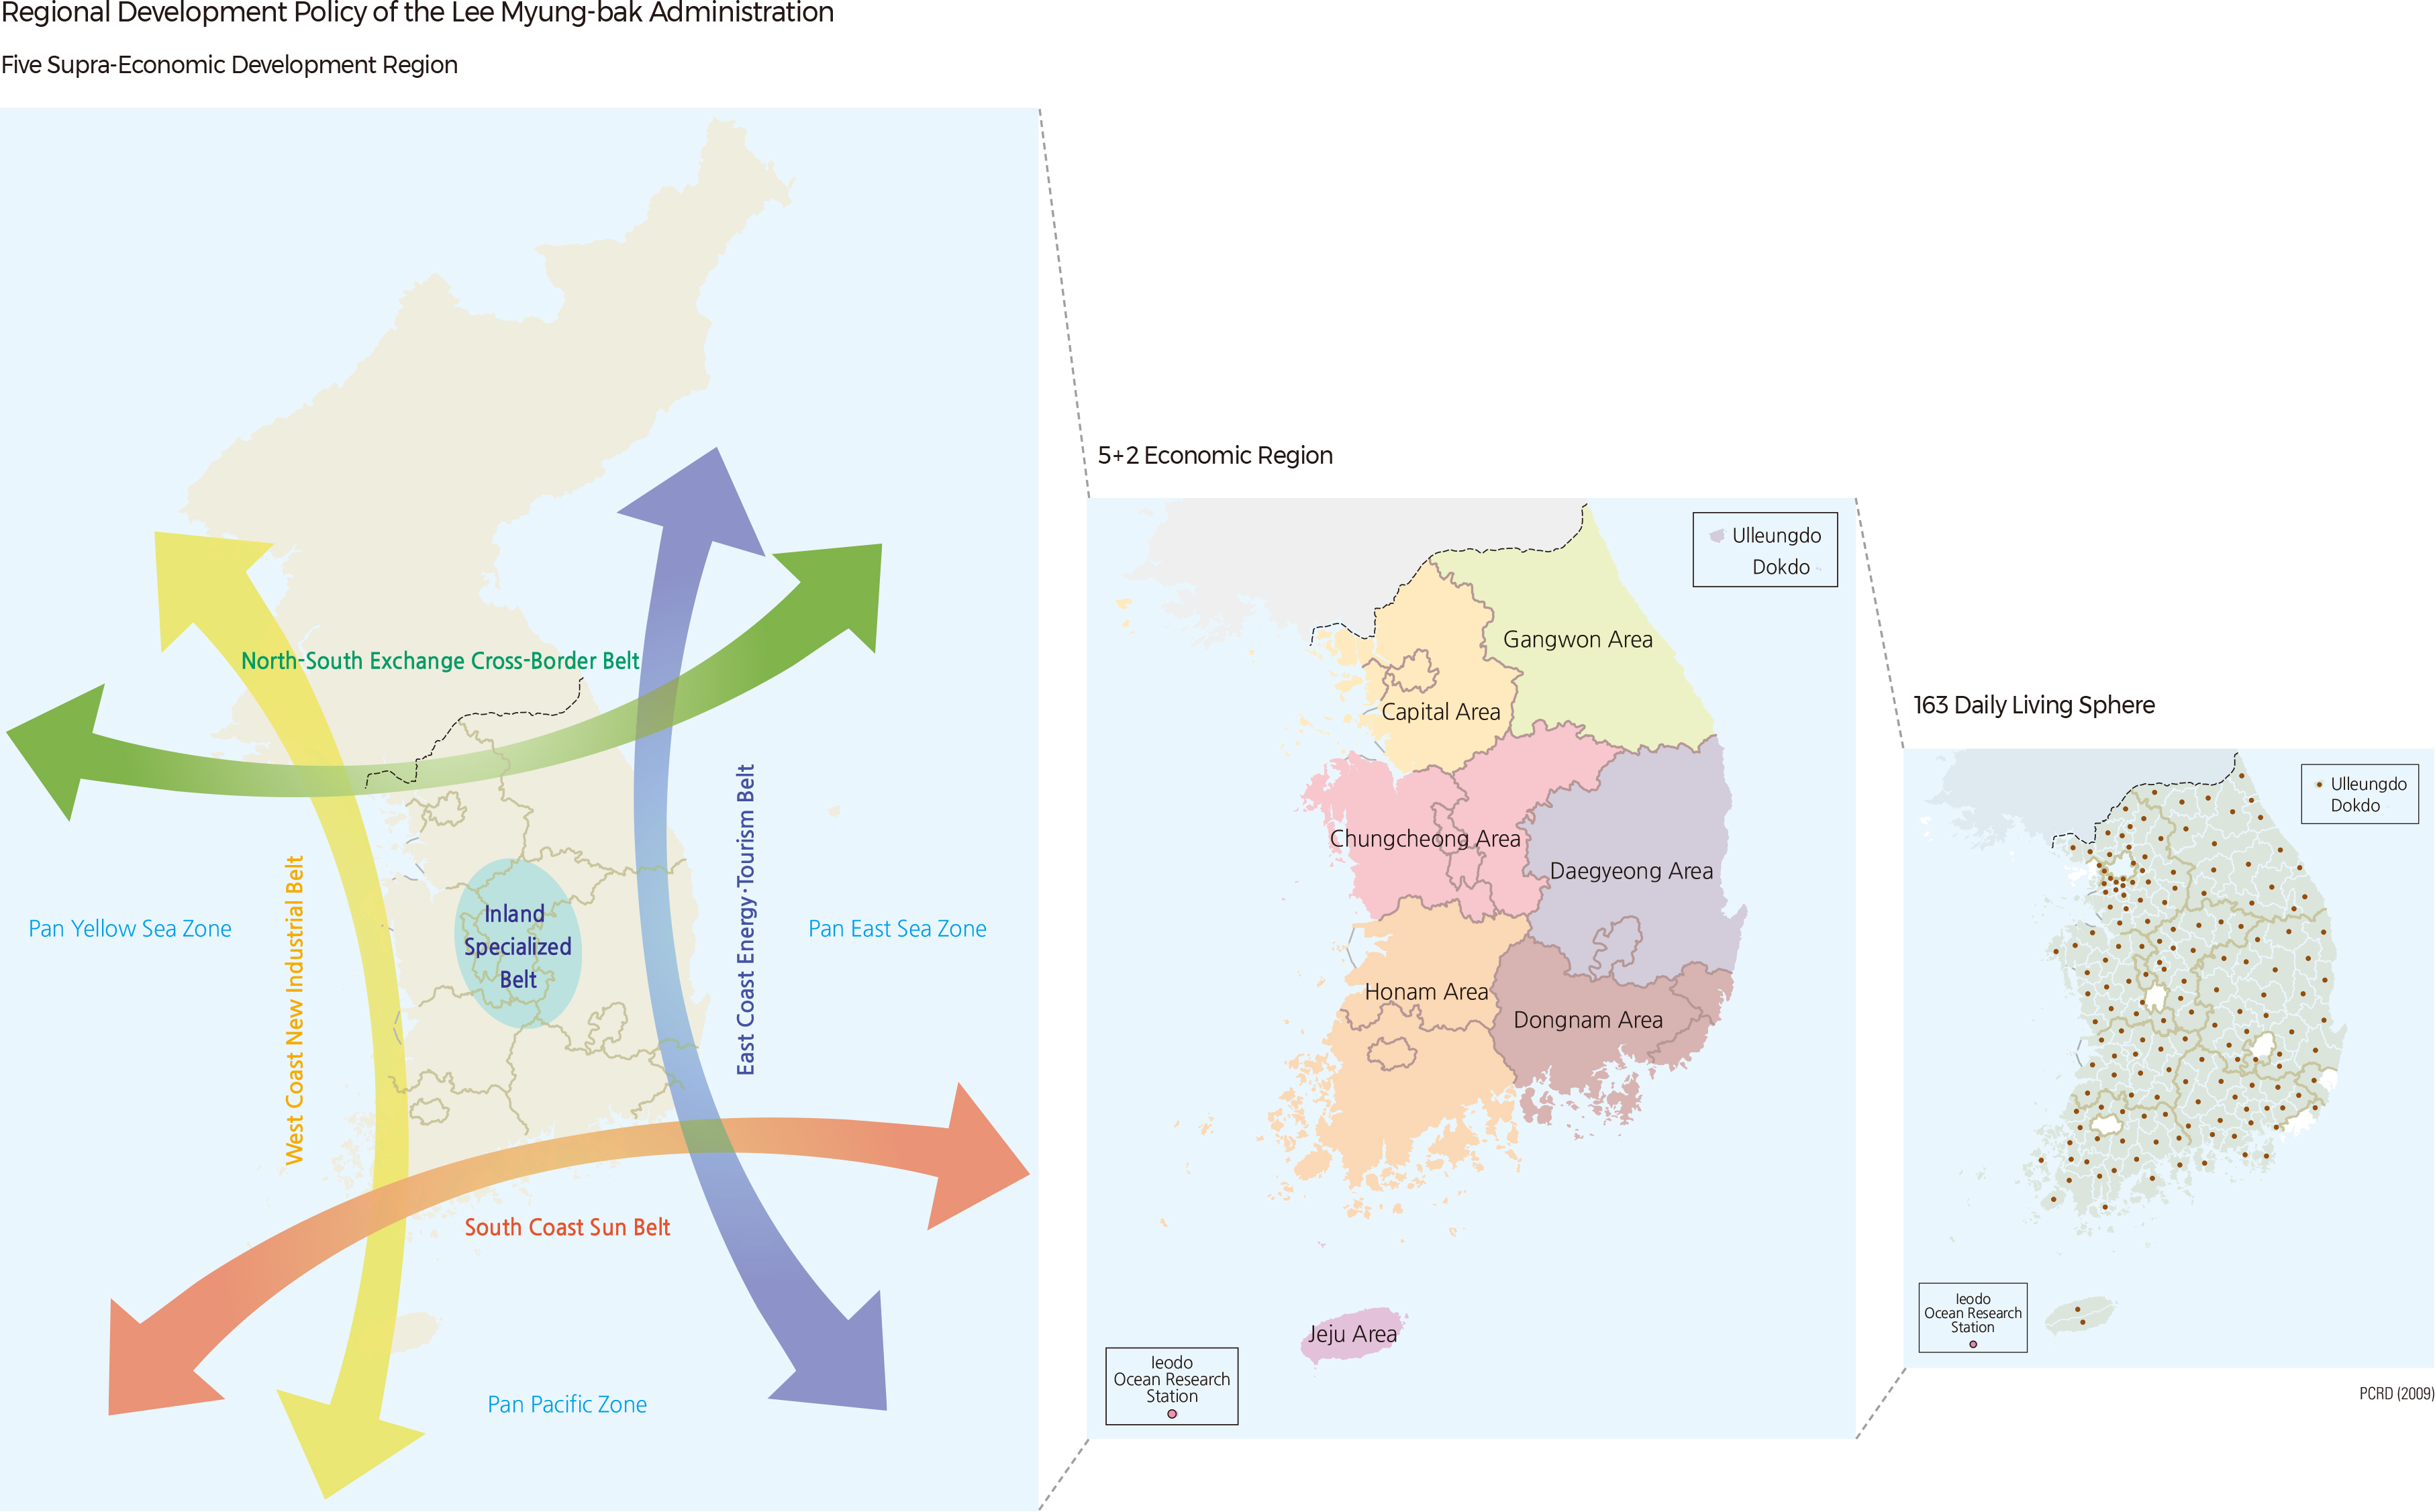 Regional Development Policy of the Lee Myung-bak Administration